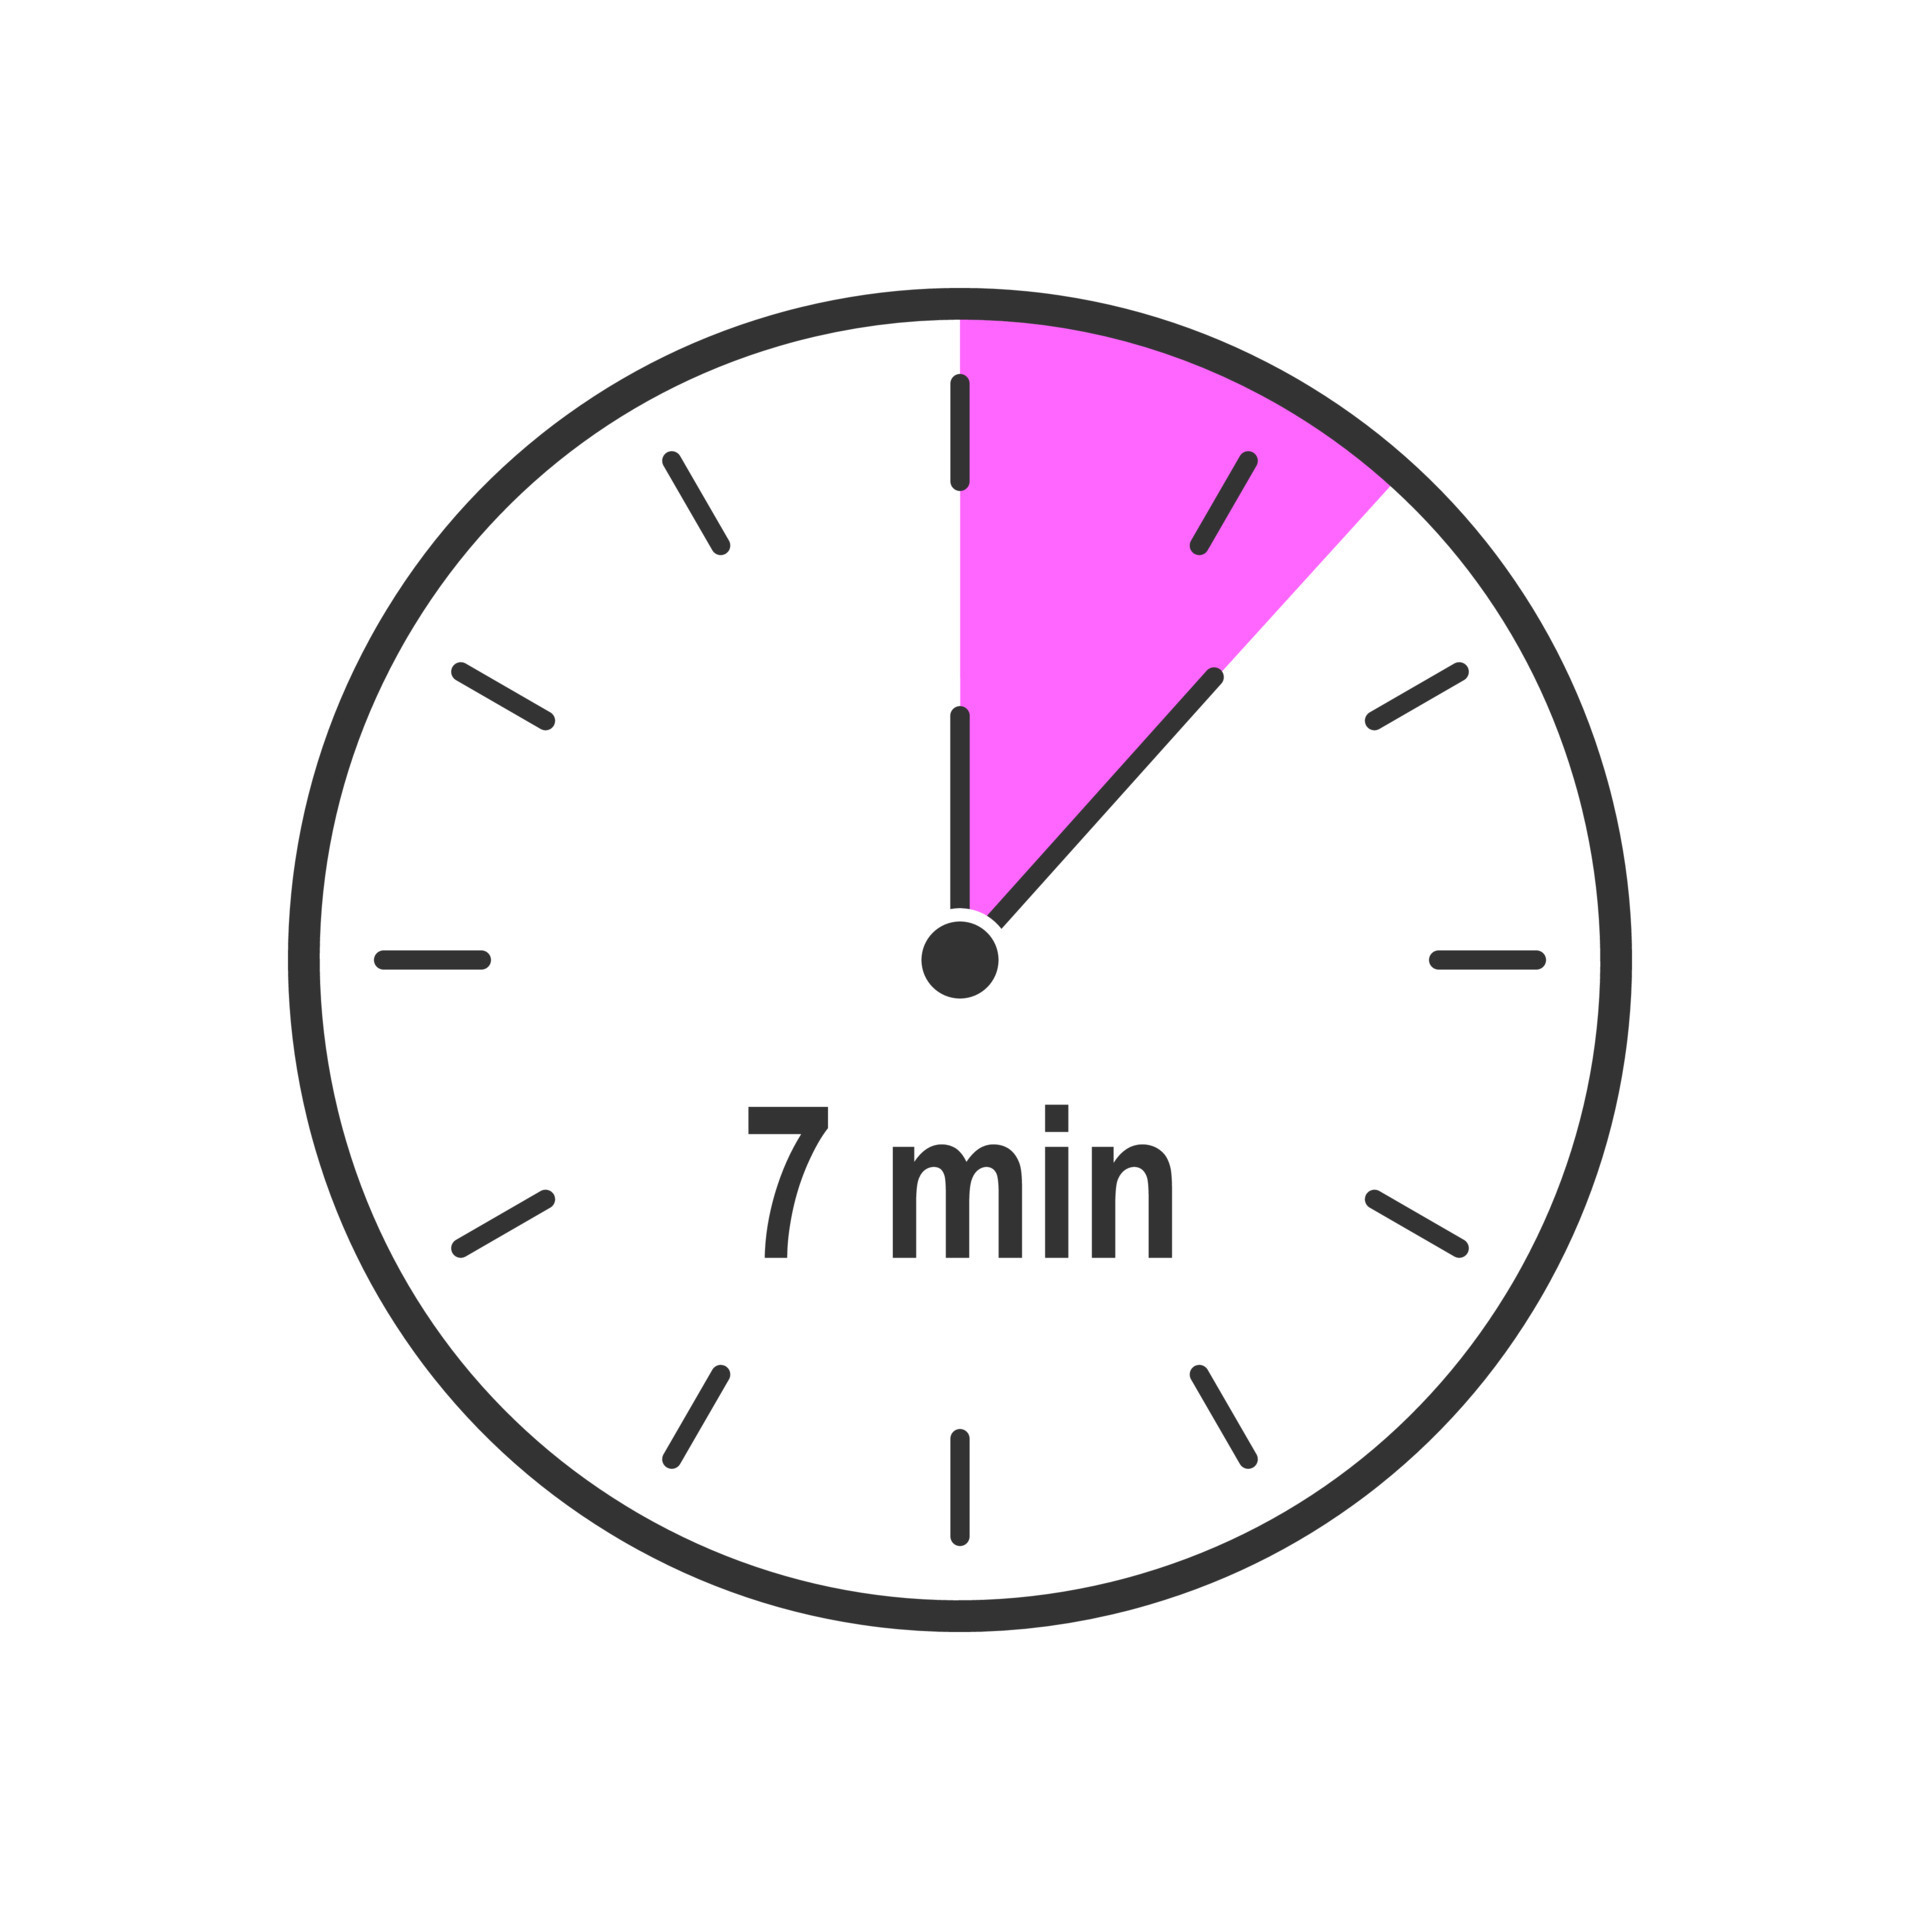 Timer icon with 7 minute time interval. Countdown clock or stopwatch 18975840 Art at Vecteezy